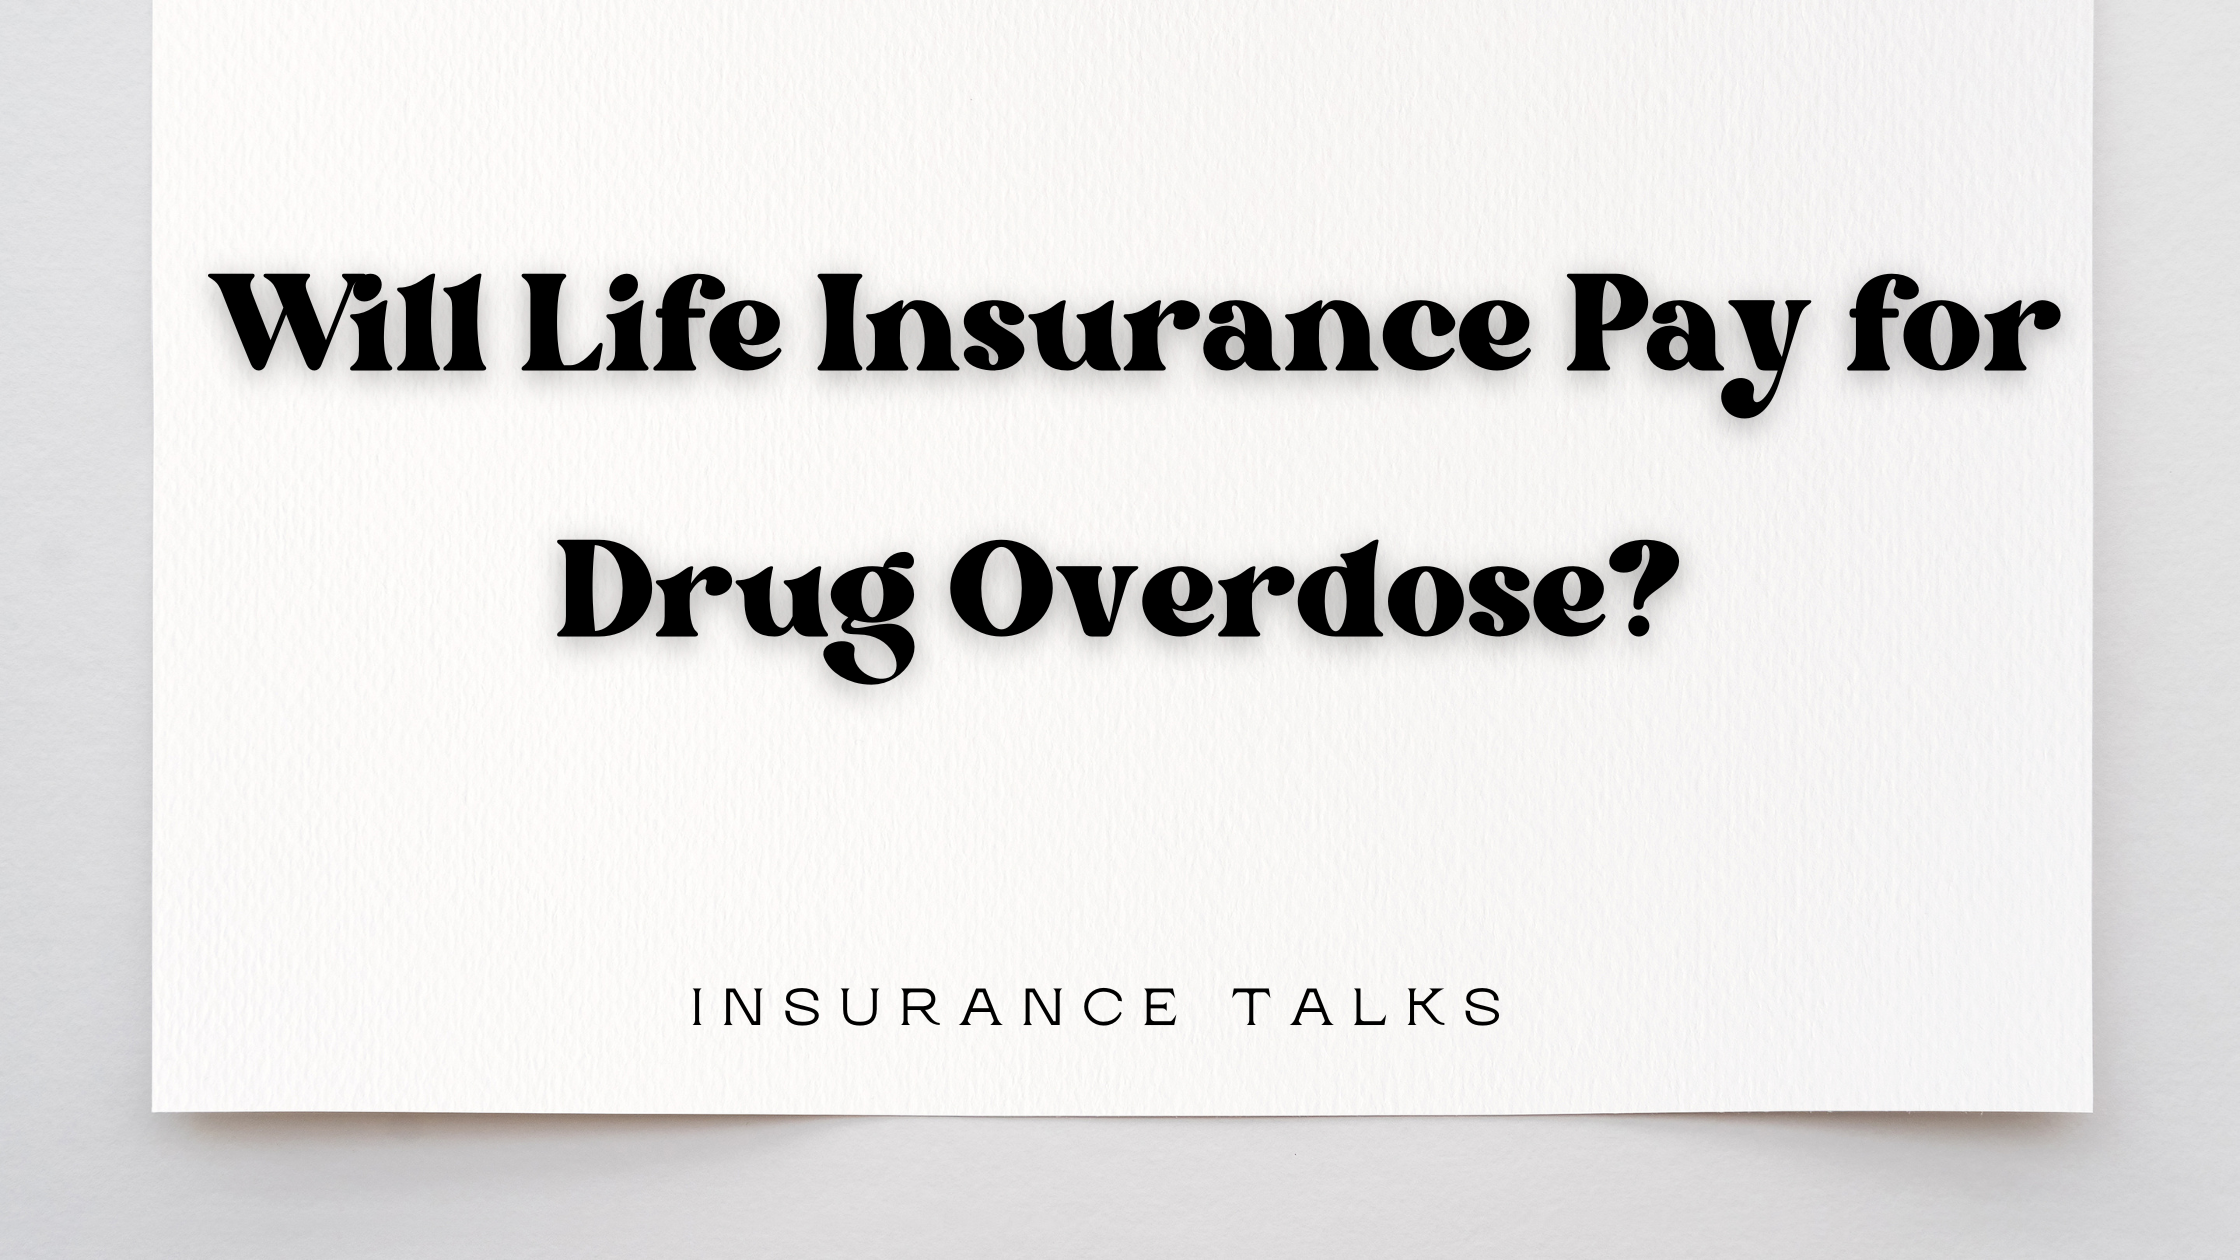 Will Life Insurance Pay for Drug Overdose?